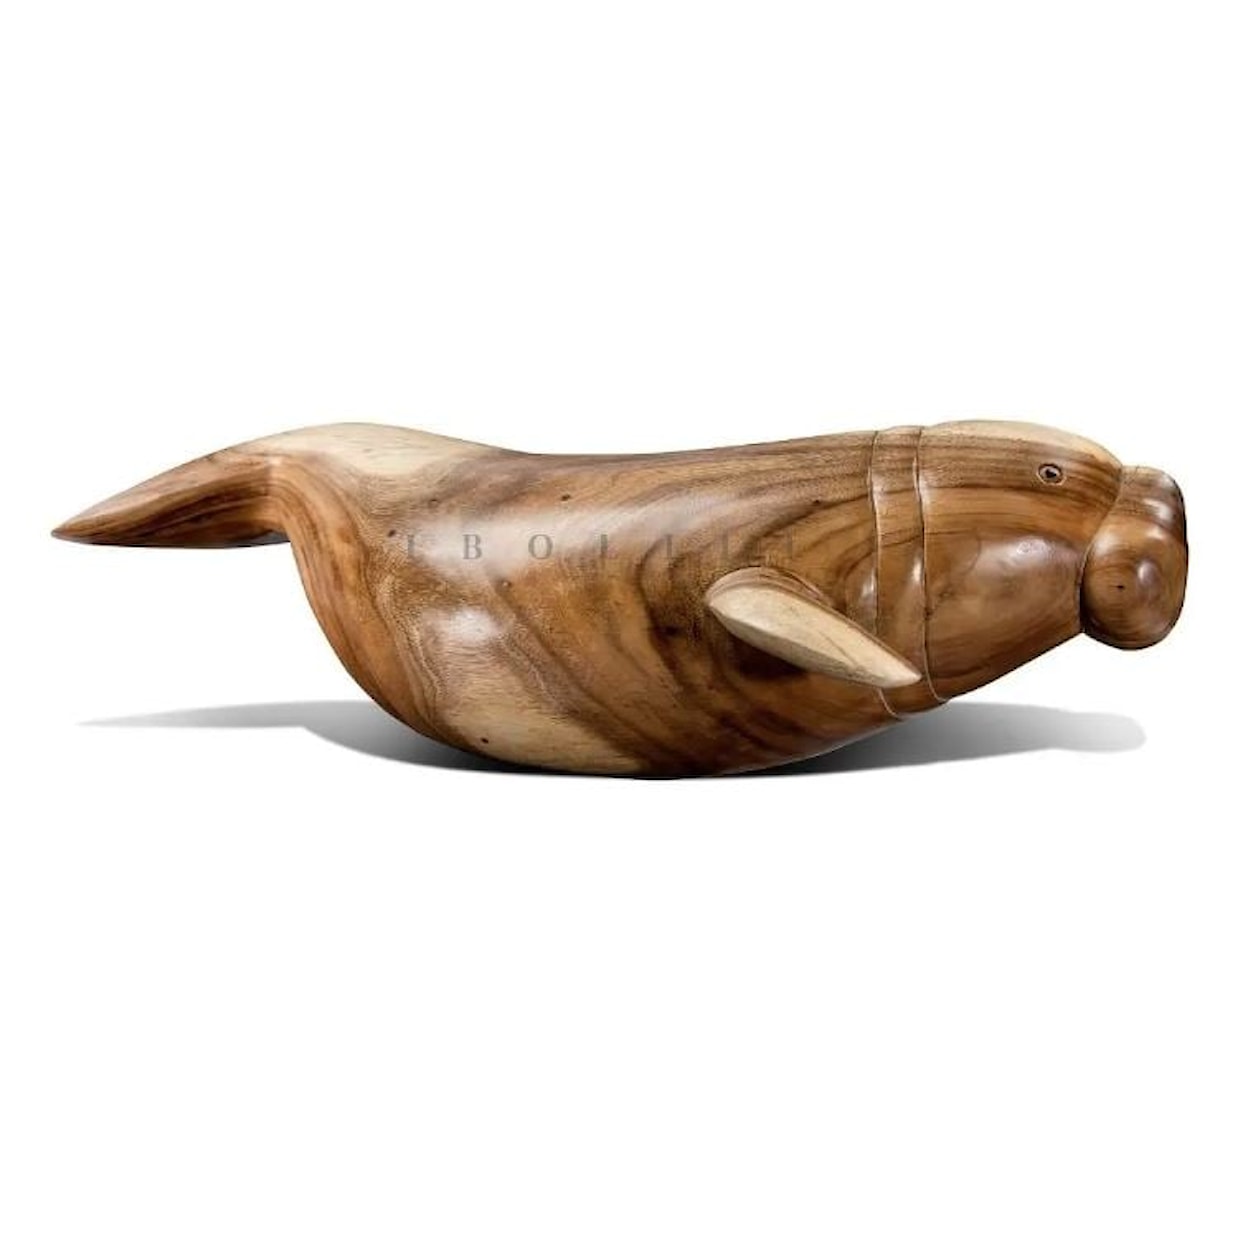 Ibolili Sculptures HANDCARVED GIANT MANATEE